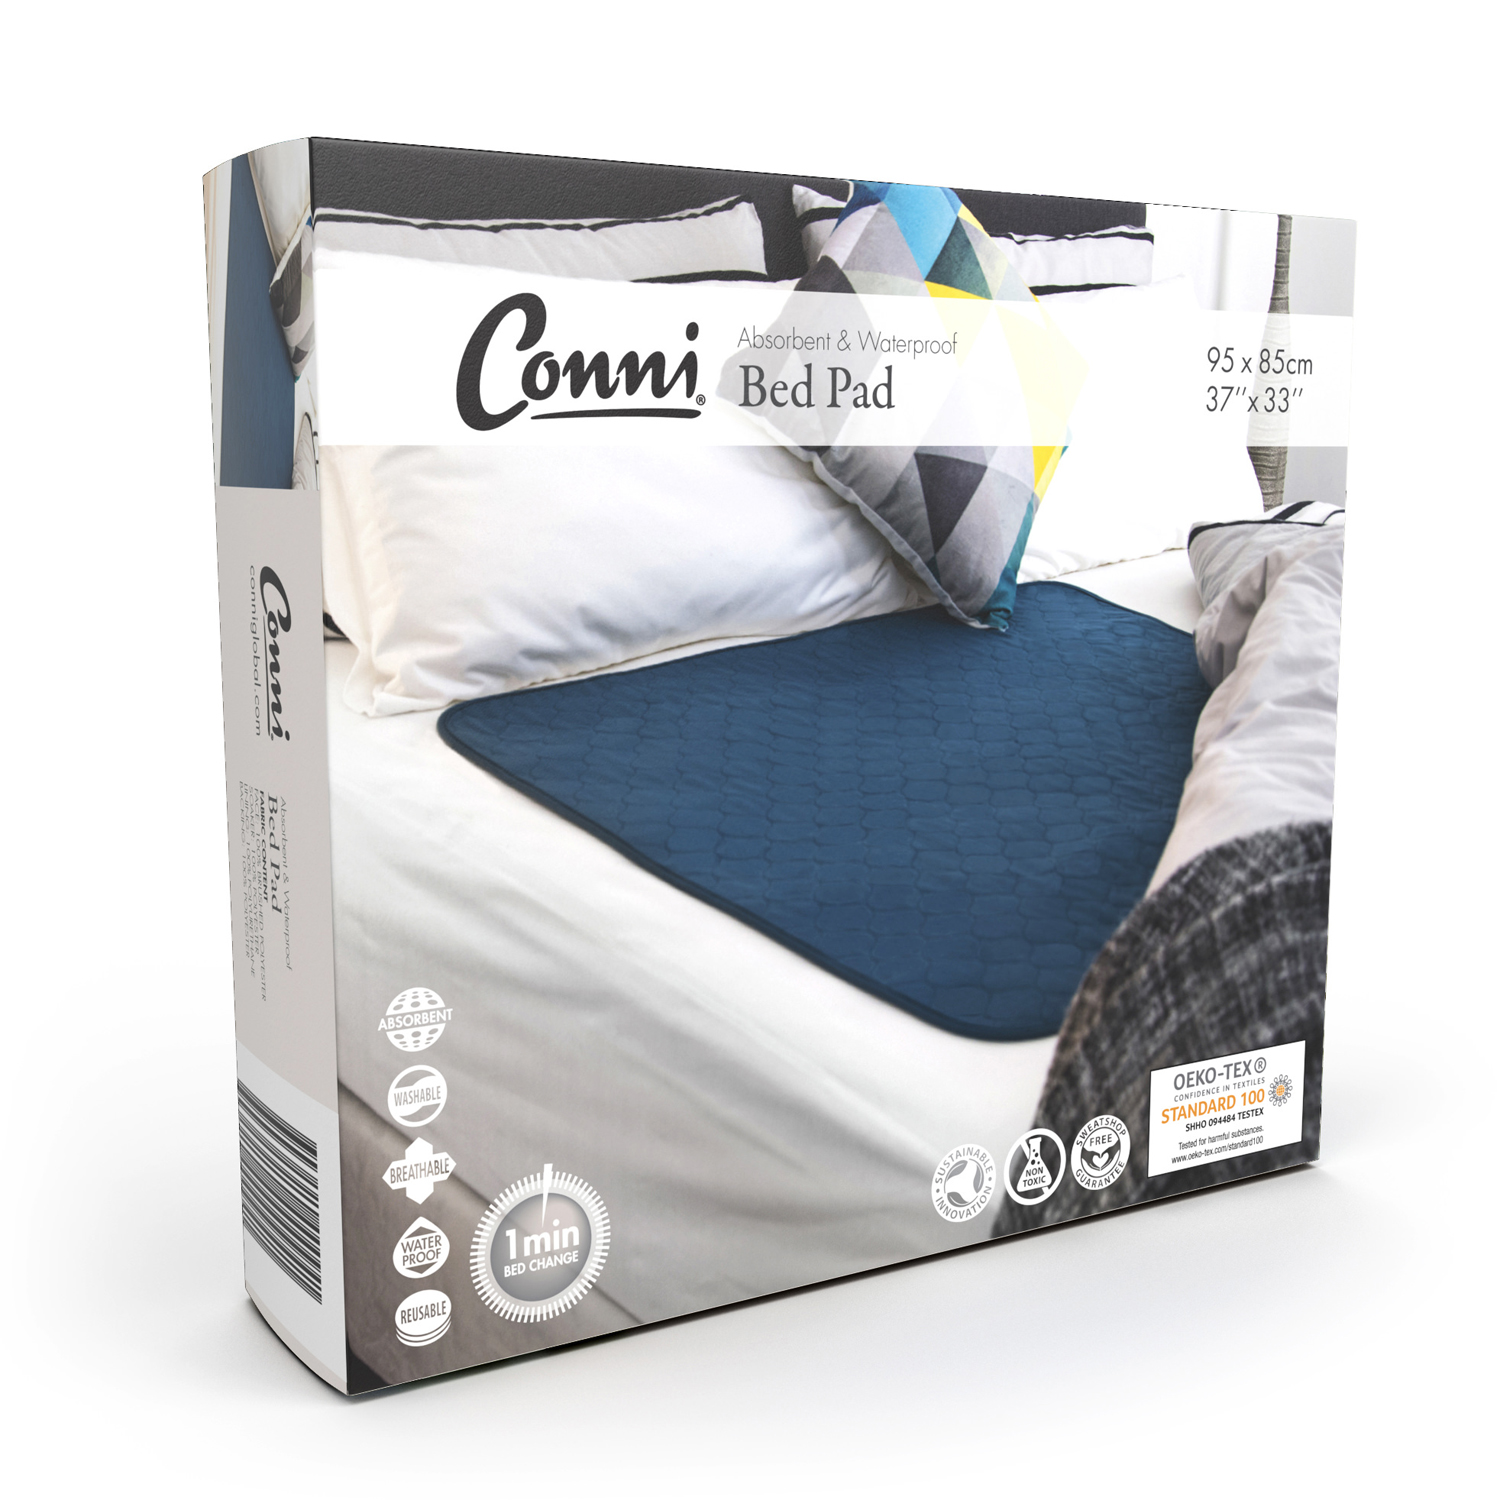 Conni waterproof bed pad for incontinence